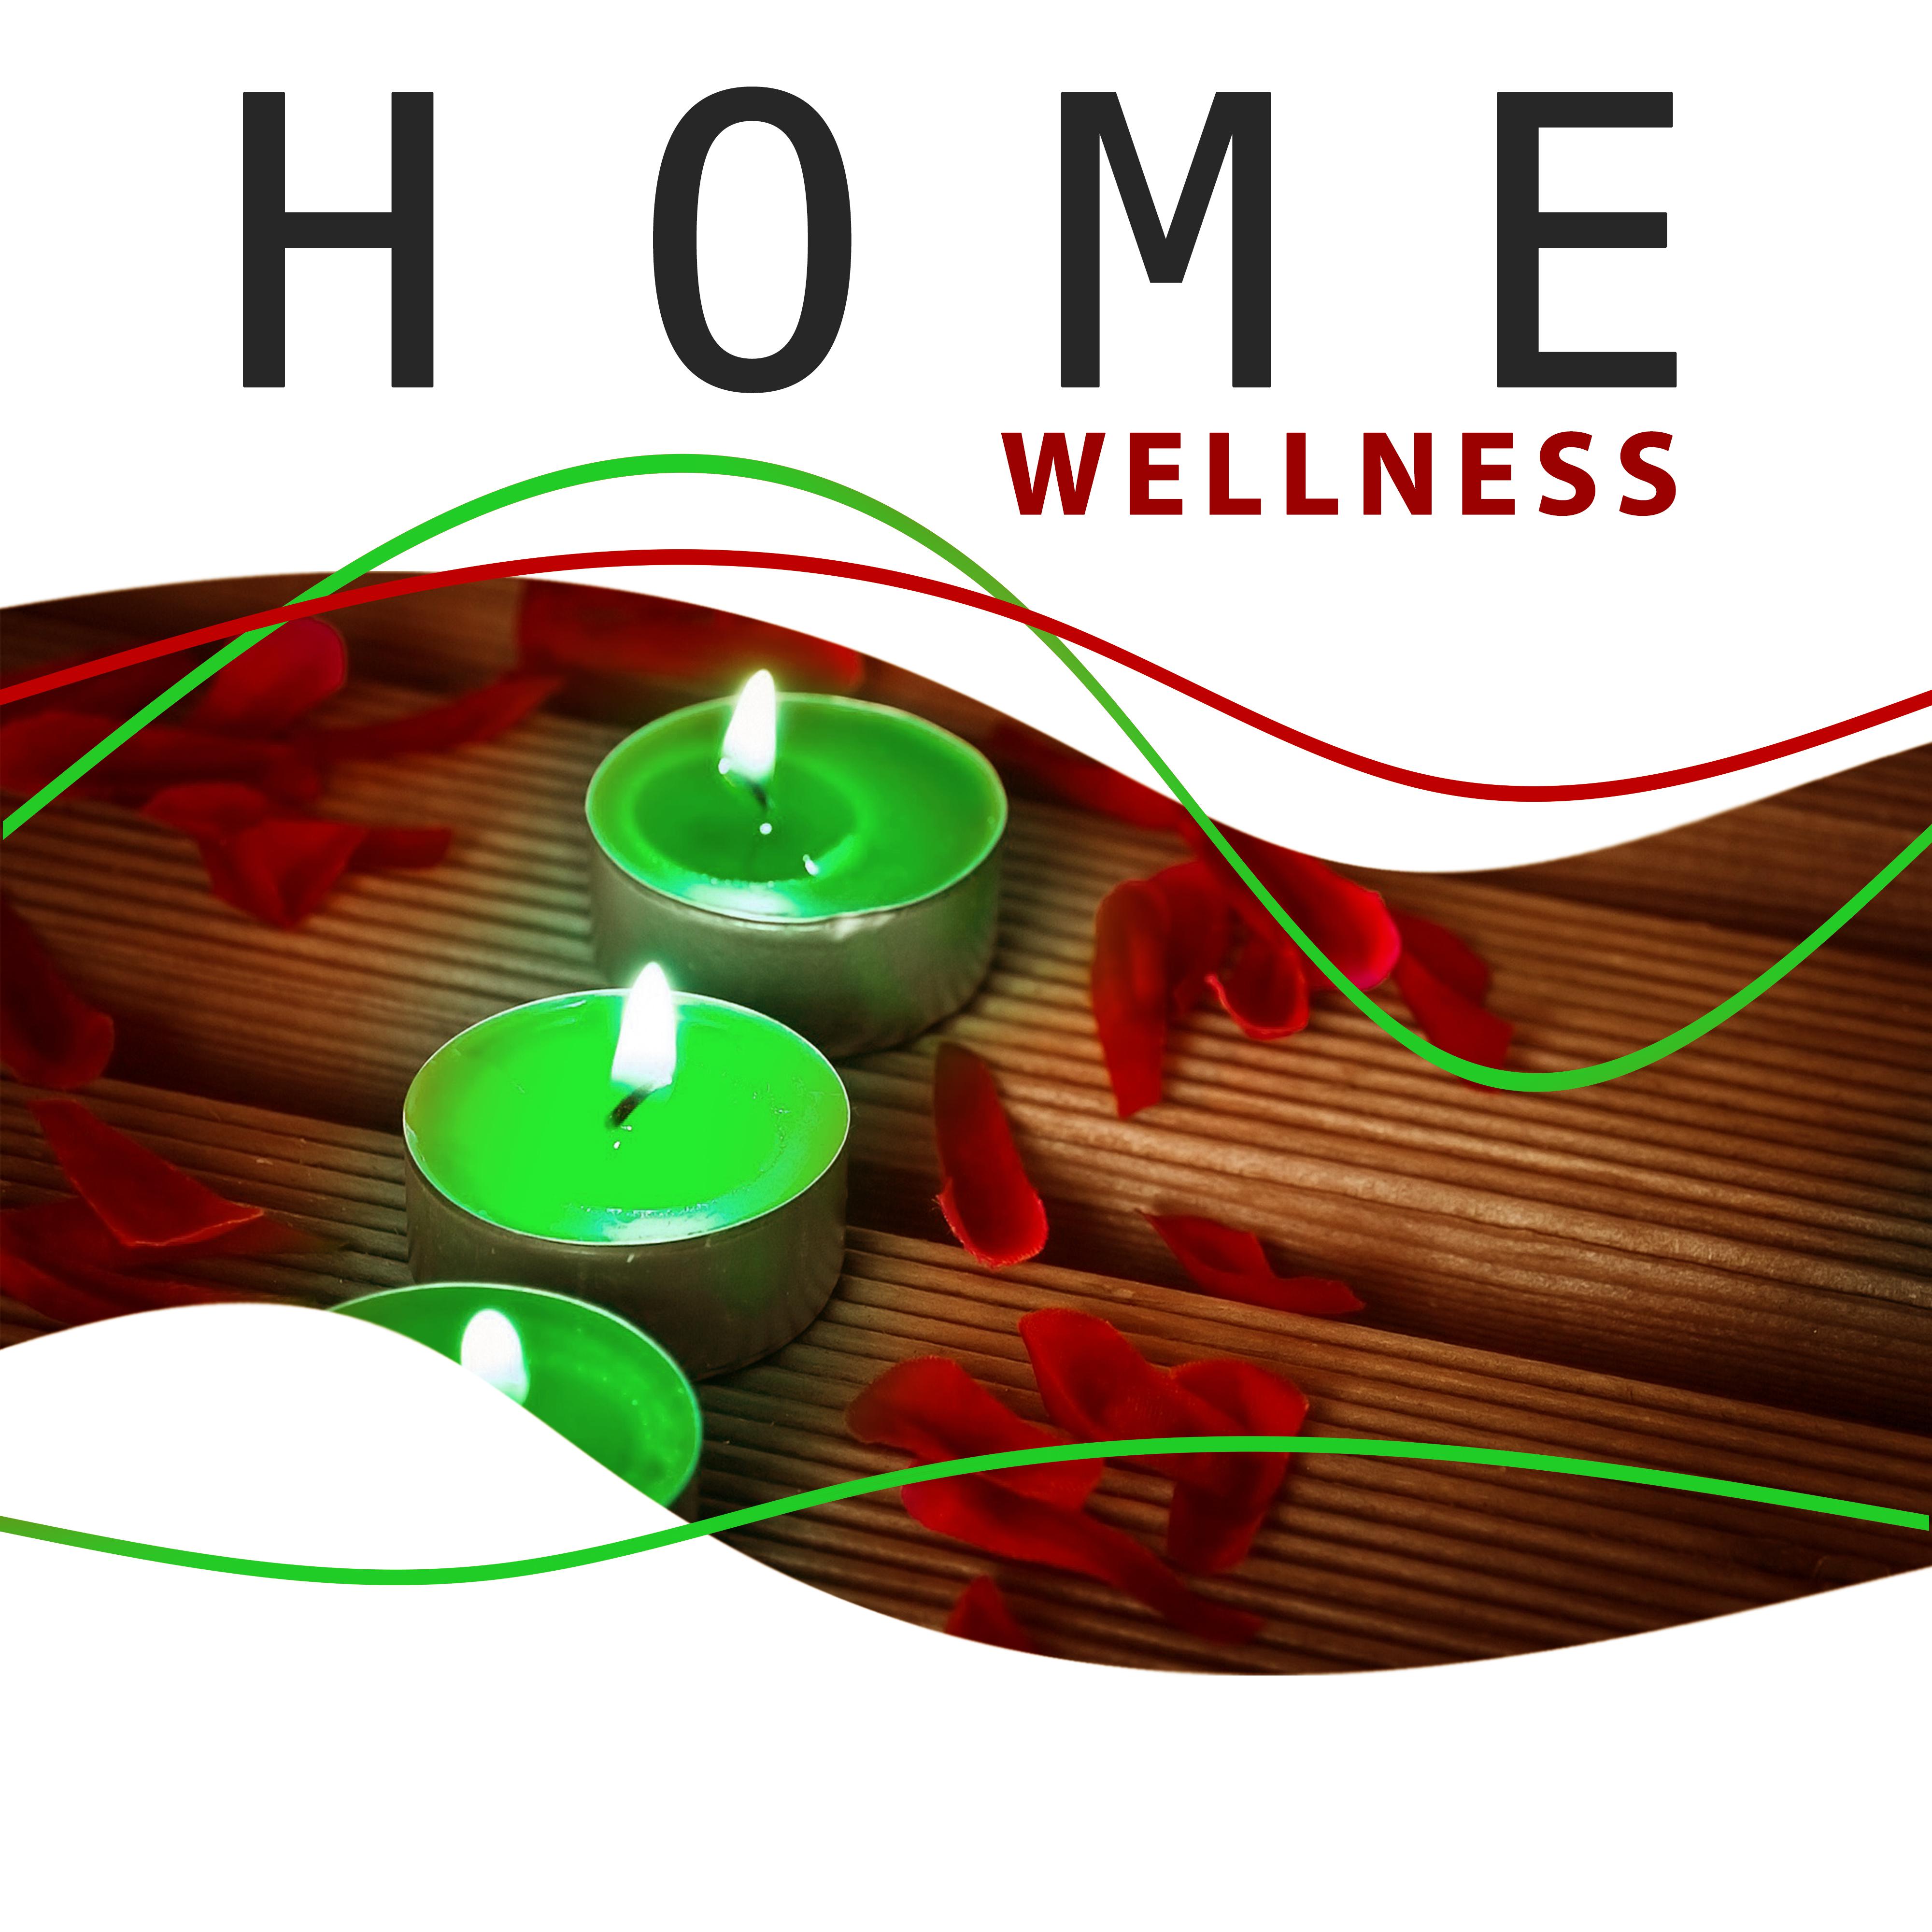 Home Wellness  Relaxation Music for Spa, Massage, Sounds of Nature for Soul and Body, Calm Mind